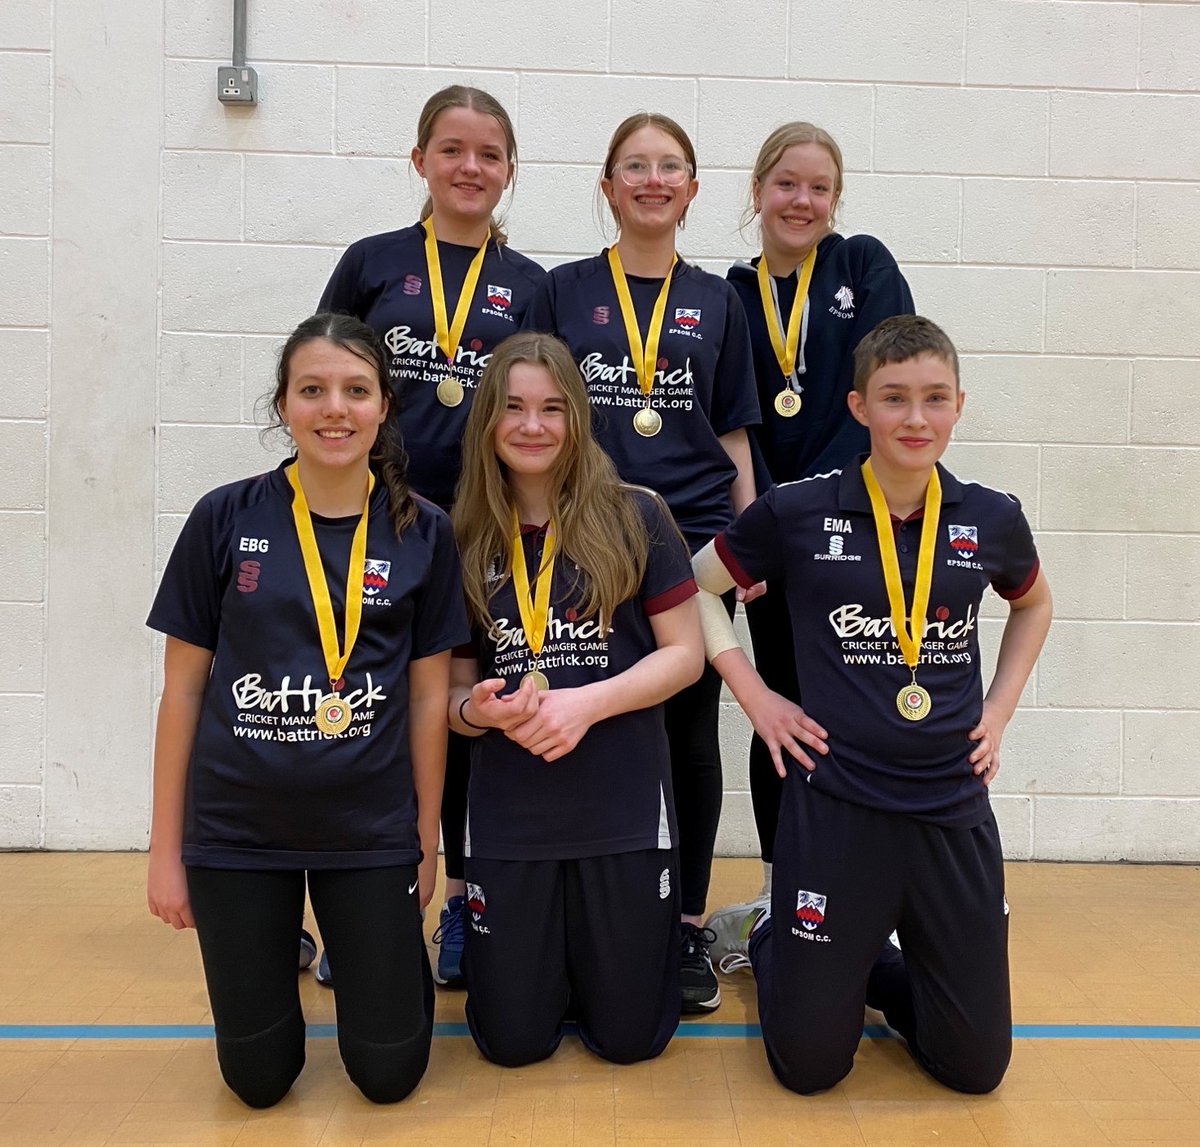 🏏🥇 Congratulations to the Epsom U14 Girls team who won our Post-Christmas Smash IT indoor league! Well done and thank you to all teams involved in the competition. #WeGotgame